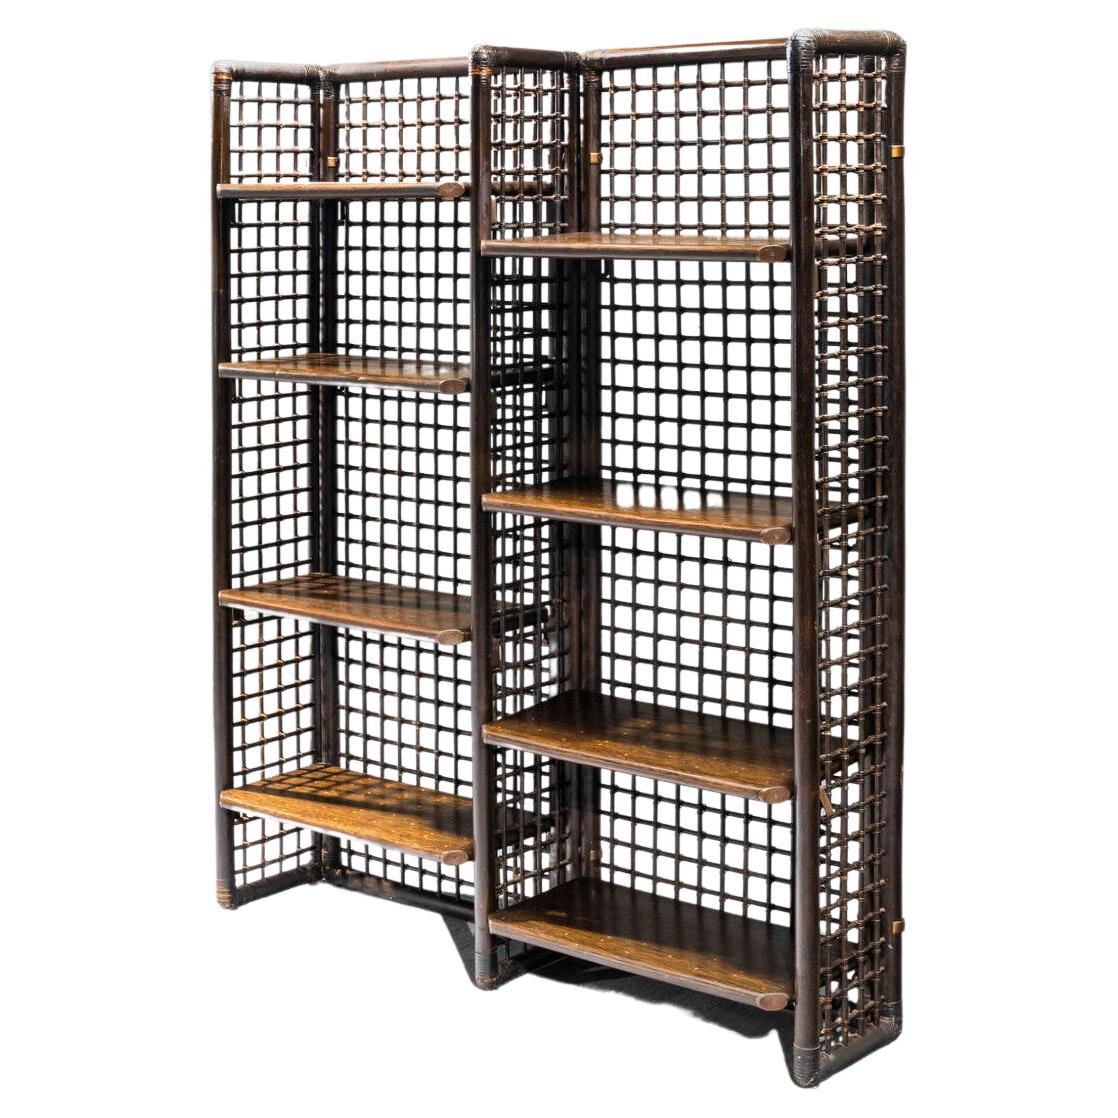 Afra e Tobia Scarpa
Bookcase Basilian 1 series
Bamboo and rattan structure
Manufactured by B&B Maxalto, 1975
Measures: cm 170 x 140 x 33.